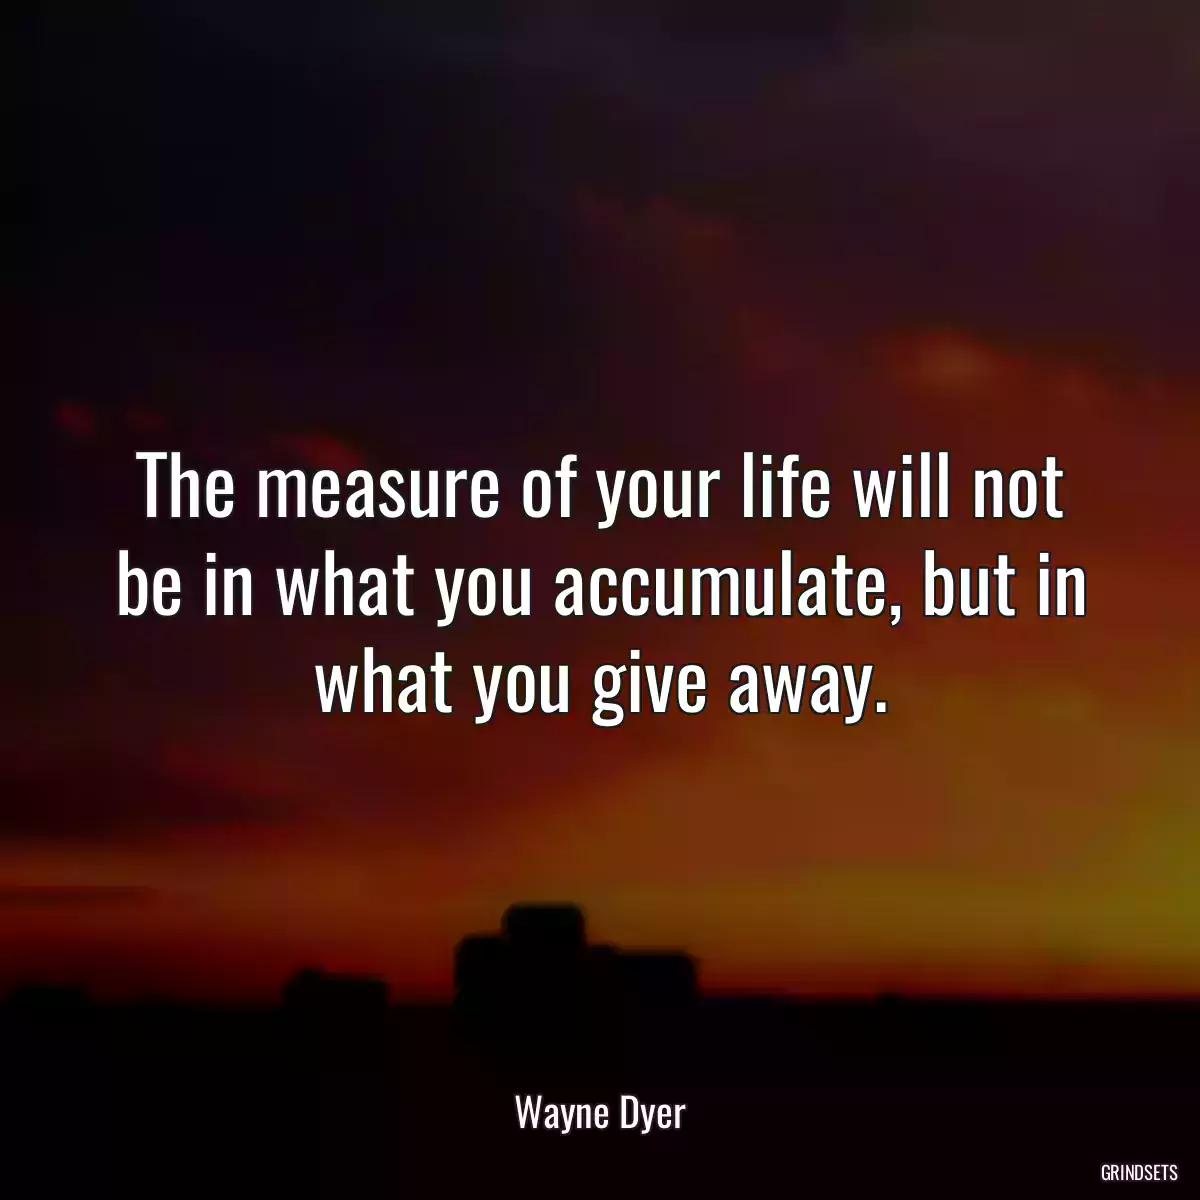 The measure of your life will not be in what you accumulate, but in what you give away.